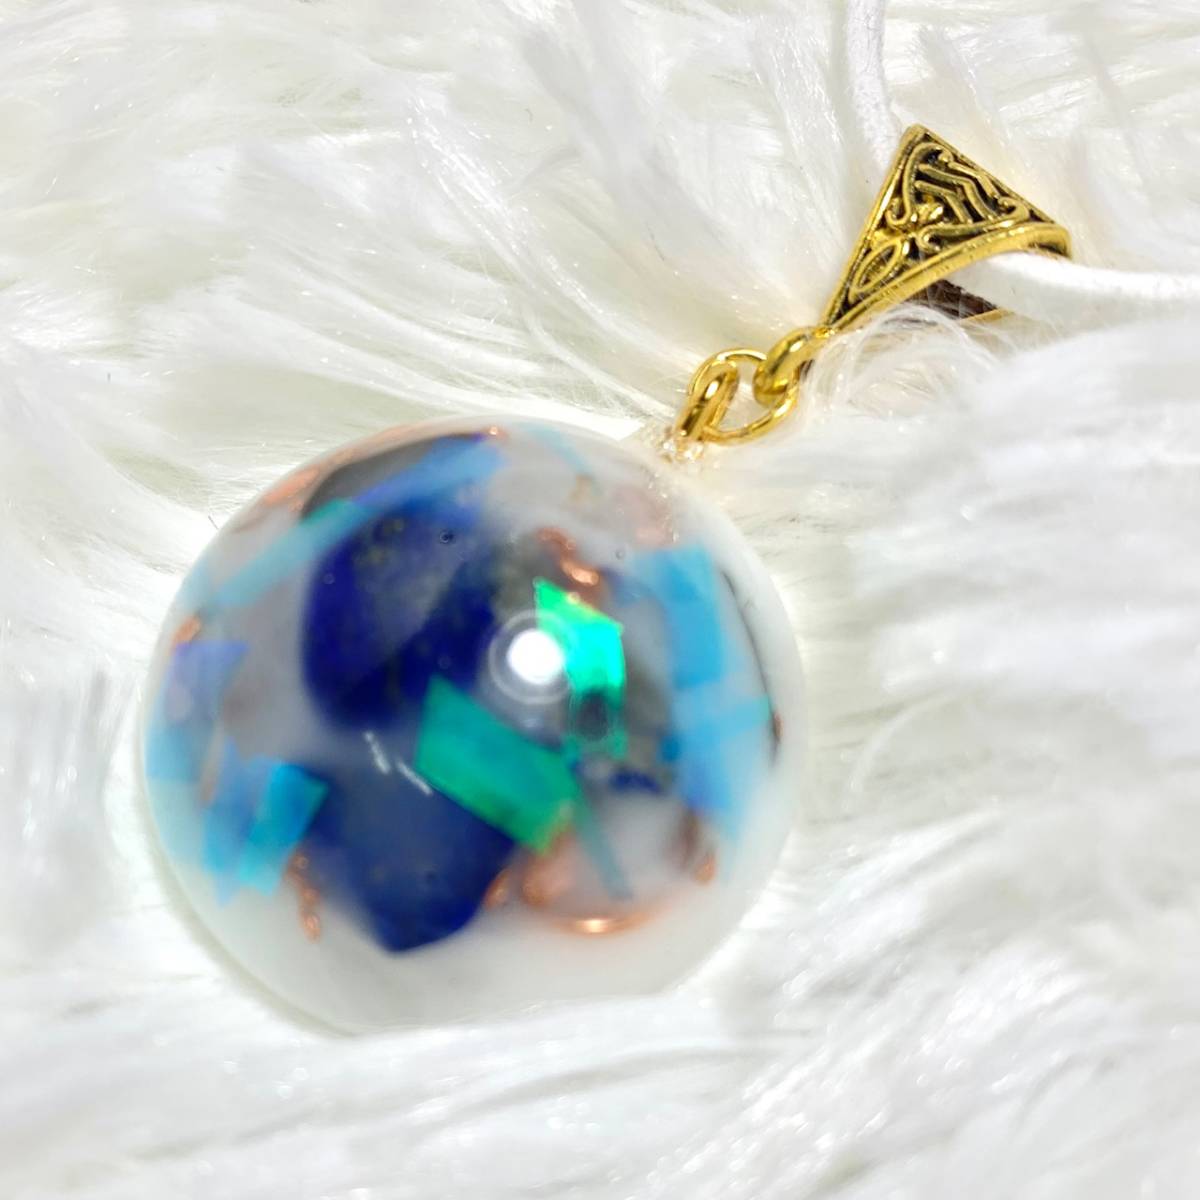  strongest luck with money *. Aurora *orugo Night necklace * fortune .* property * lottery 